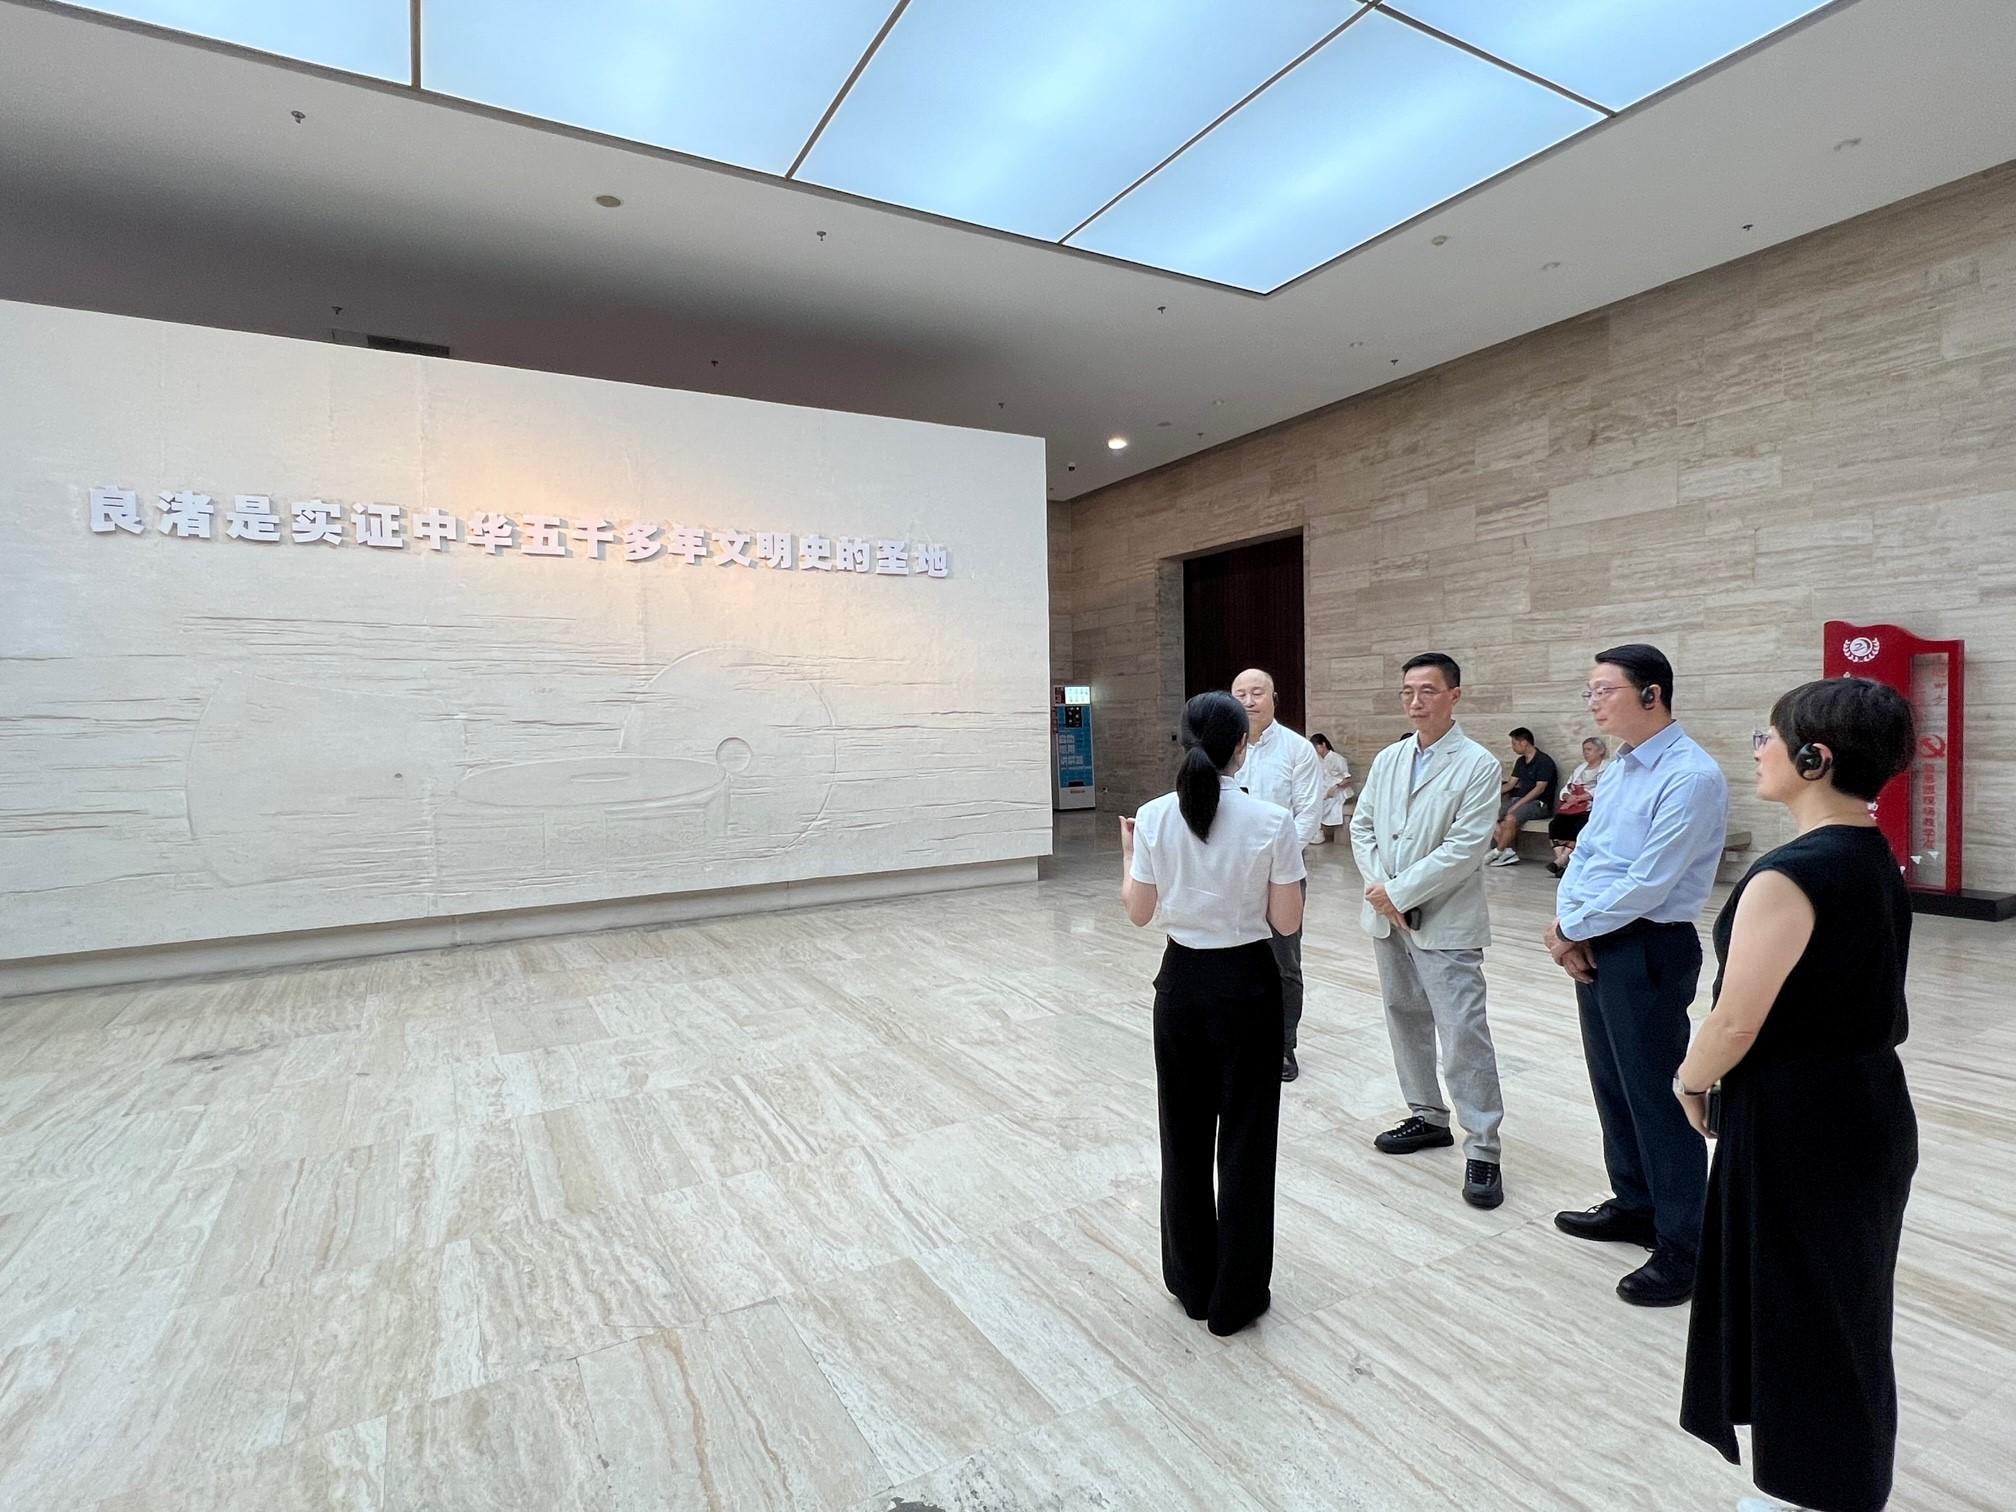 The Secretary for Culture, Sports and Tourism, Mr Kevin Yeung (third right), and the Director of Leisure and Cultural Services, Mr Vincent Liu (second right), visited the Liangzhu Museum in Hangzhou yesterday (July 30) to get a grasp on the results of local archaeological work.